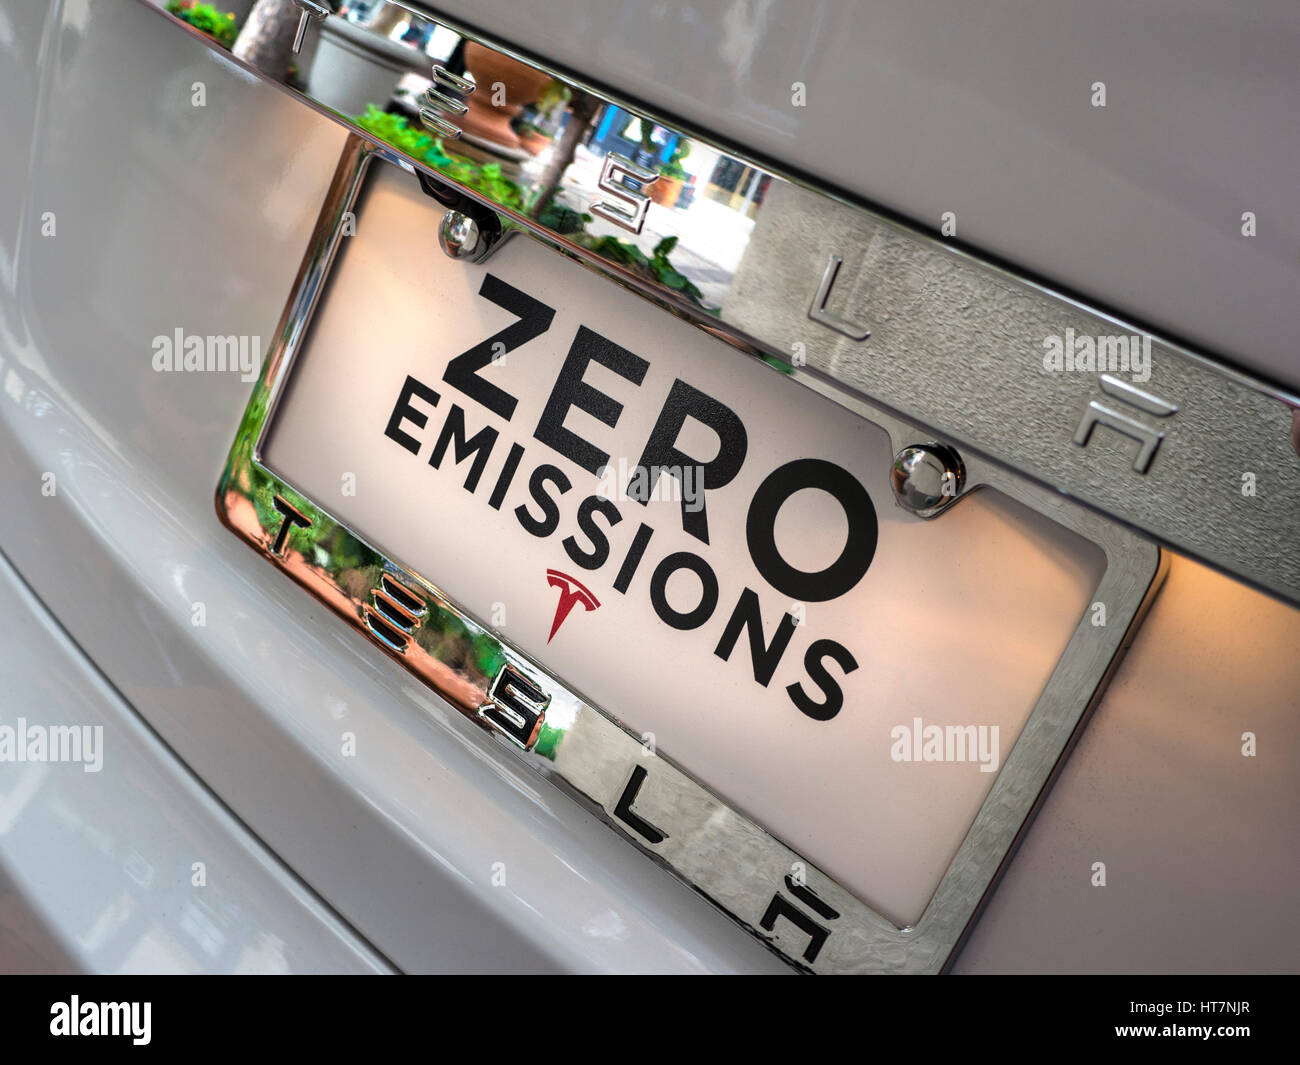 TESLA Zero emissions display plate on latest Tesla an all electric powered stylish sports car with around 300 miles range per charge Stock Photo